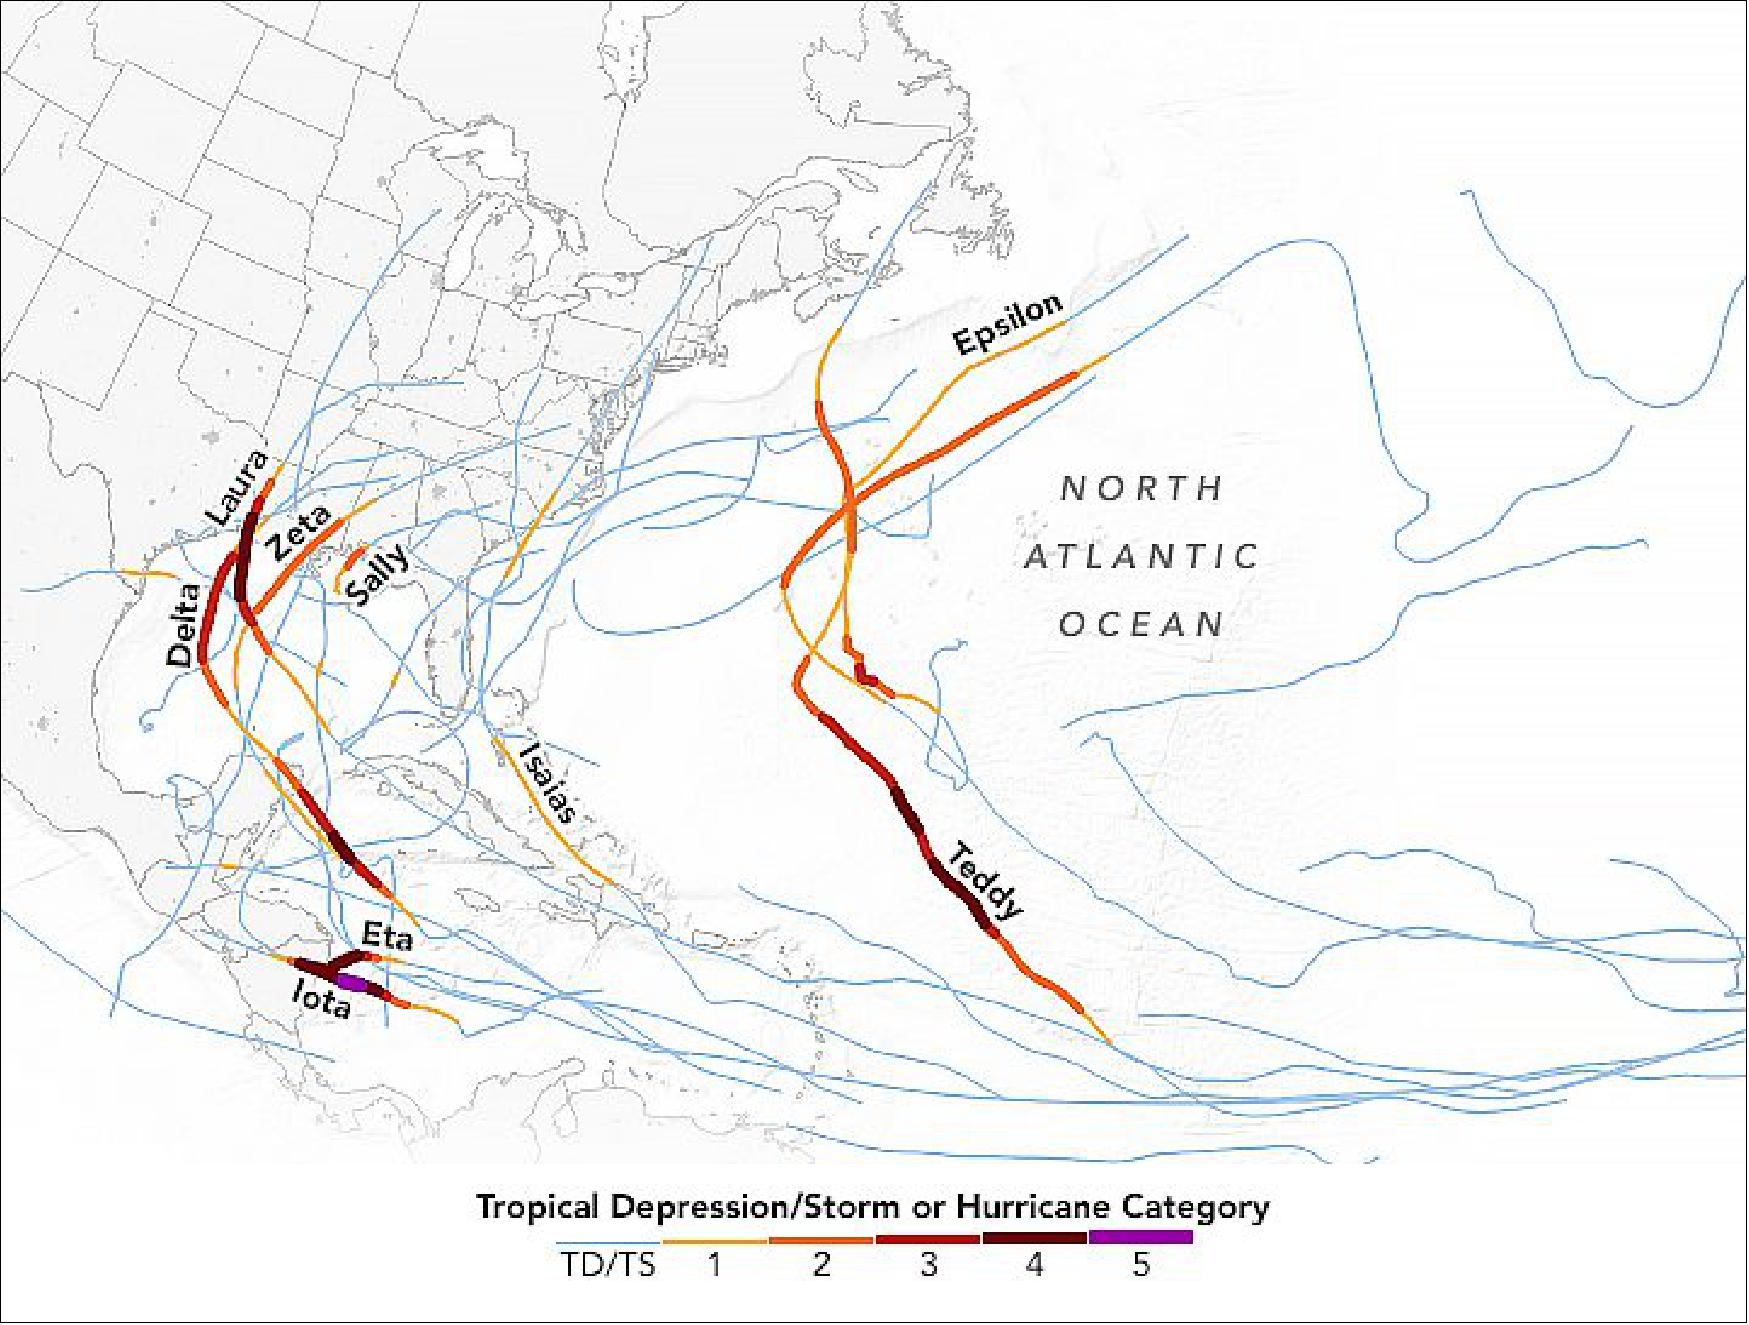 Figure 40: The map shows the tracks of all 30 Atlantic storms in 2020, highlighting a few of the named storms. Three of them—Eta, Iota, and Delta—saw their winds intensify by at least 80 miles (130 km) per hour in 24 hours. The data for the map come from the International Best Track Archive for Climate Stewardship (IBTrACS), the official archive used by the World Meteorological Organization (image credit: NASA Earth Observatory images by Joshua Stevens, using GOES 16 data from NOAA and the National Centers for Environmental Information (NCEI) and the International Best Track Archive for Climate Stewardship (IBTrACS). Story by Kasha Patel)